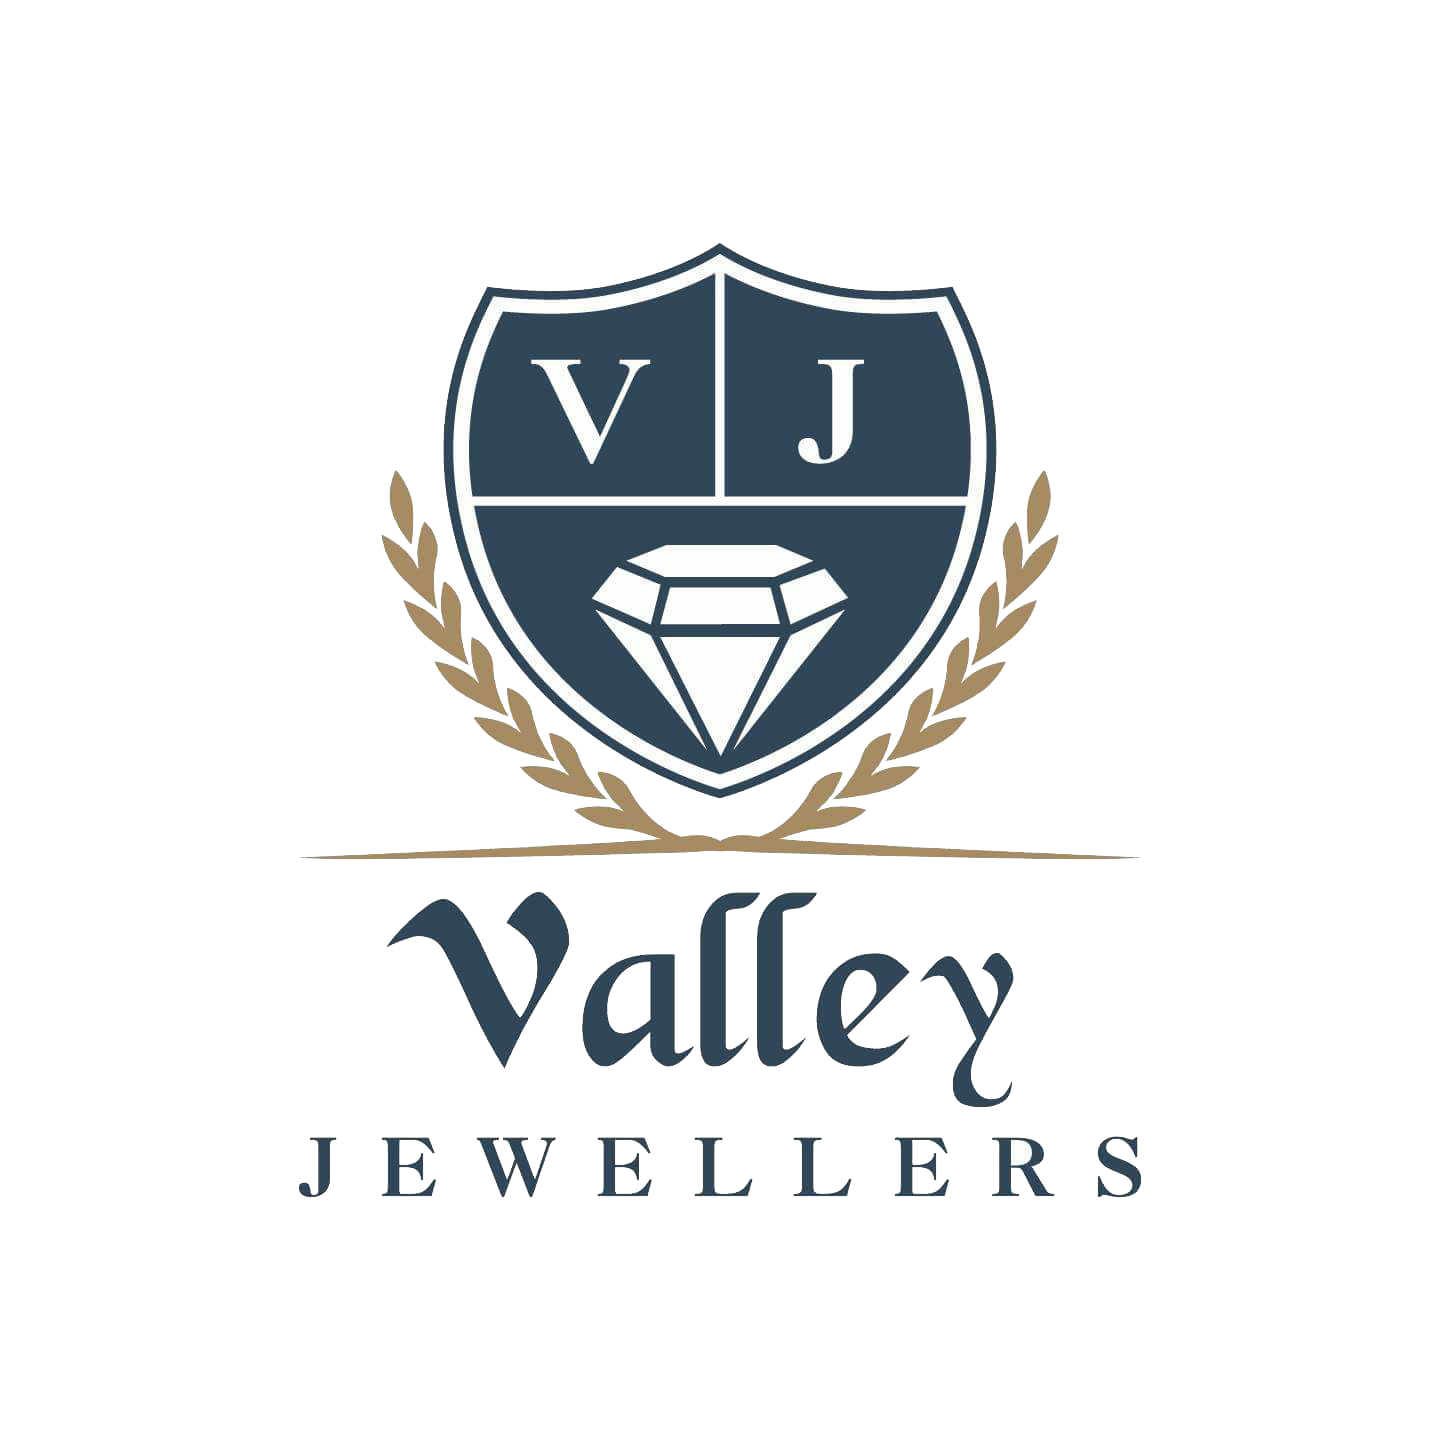 Welcome to Valley Jewellers, located in Jordan Village